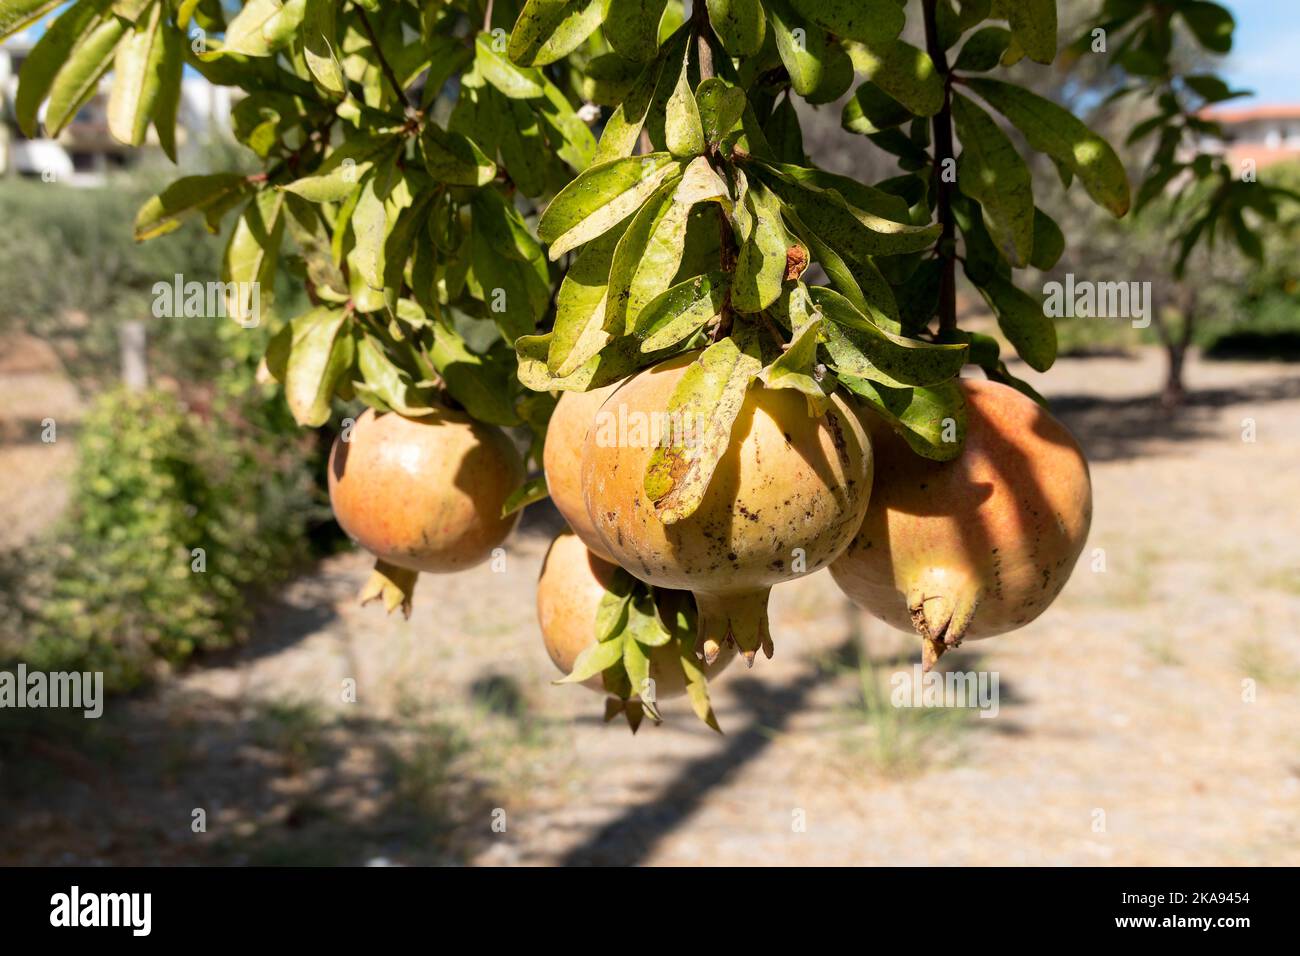 Pomegranates, Punica granatum ripening on a pomegranate tree in a small garden in Greece.The image shows the fruits, bunched and hanging from a branch Stock Photo